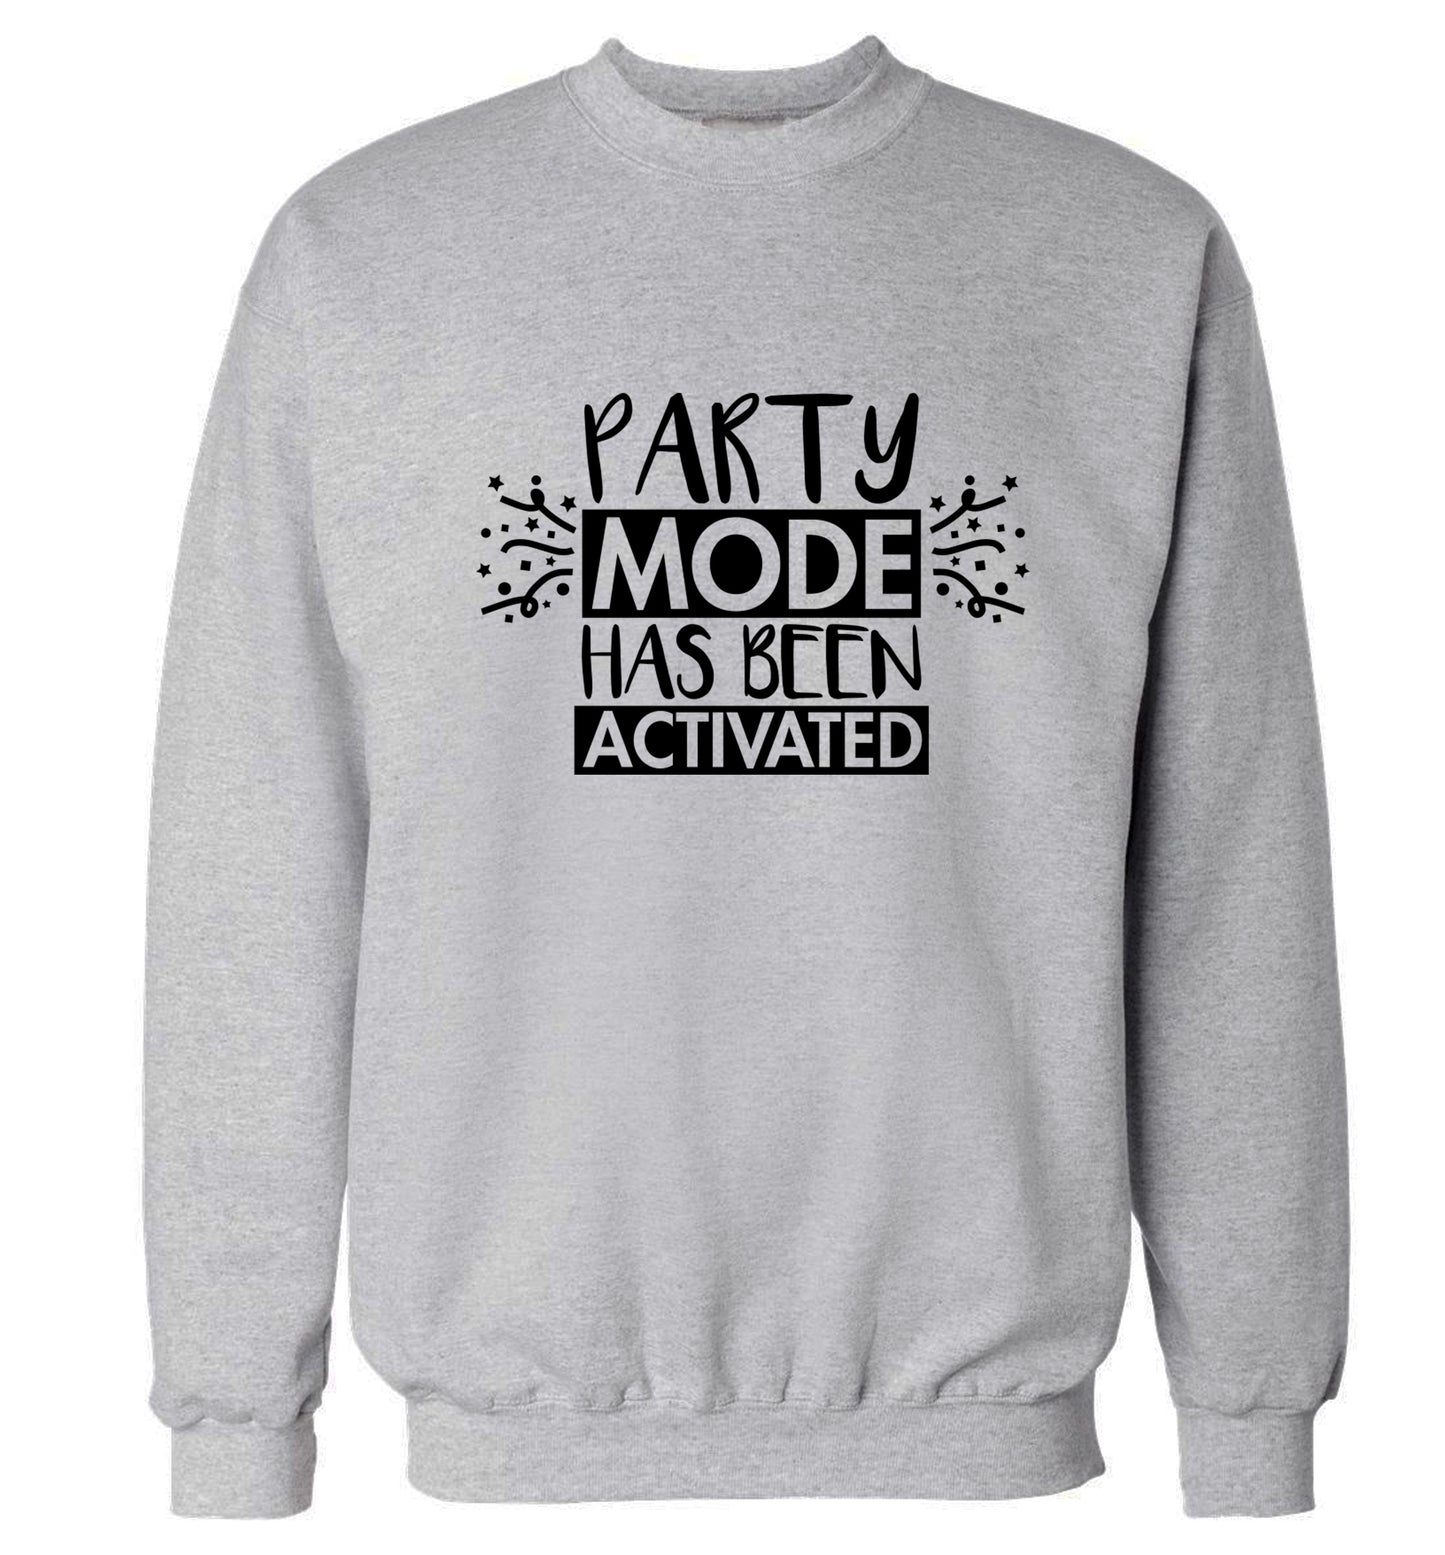 Please do not disturb party mode has been activated Adult's unisex grey Sweater 2XL